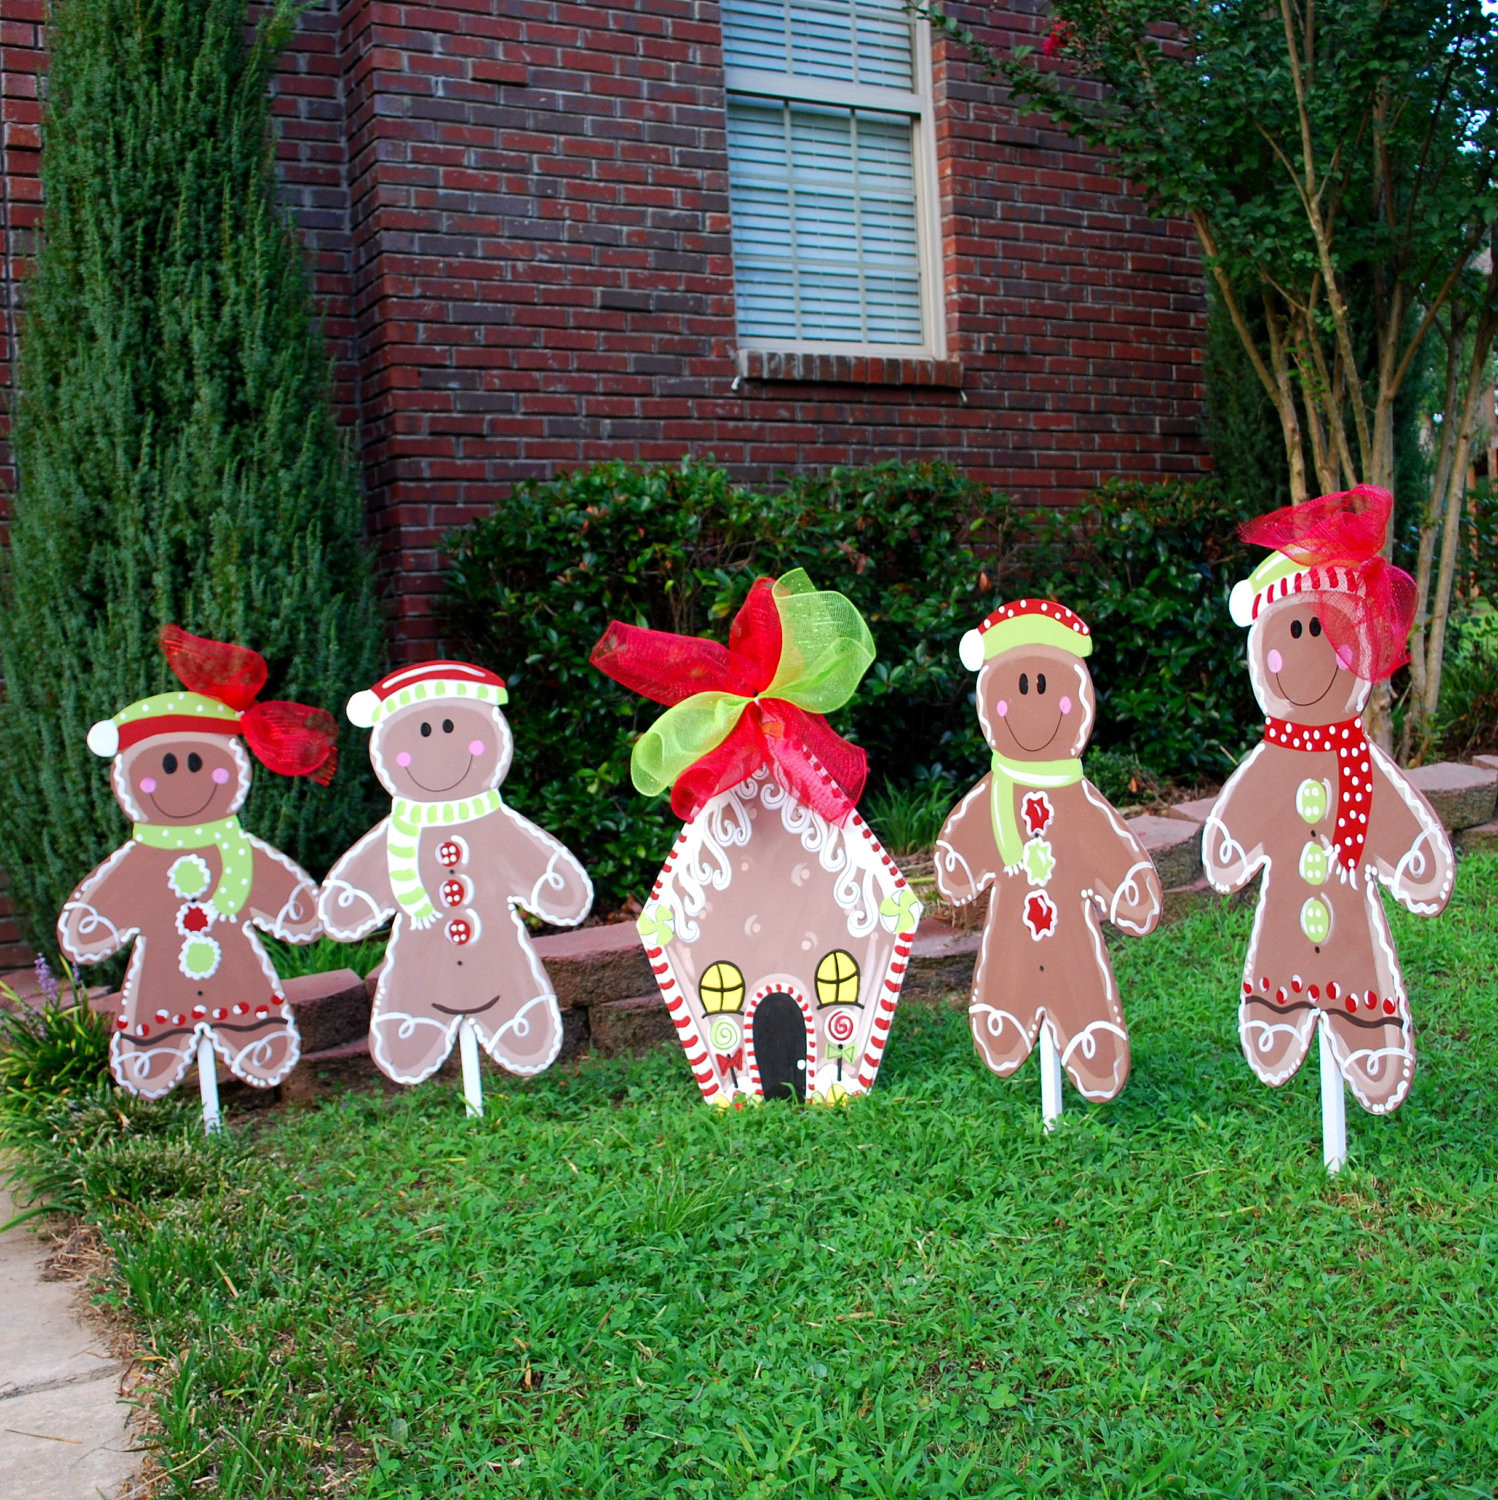 DIY Christmas Yard Decor
 Christmas Yard Decor Gingerbread Man Christmas by